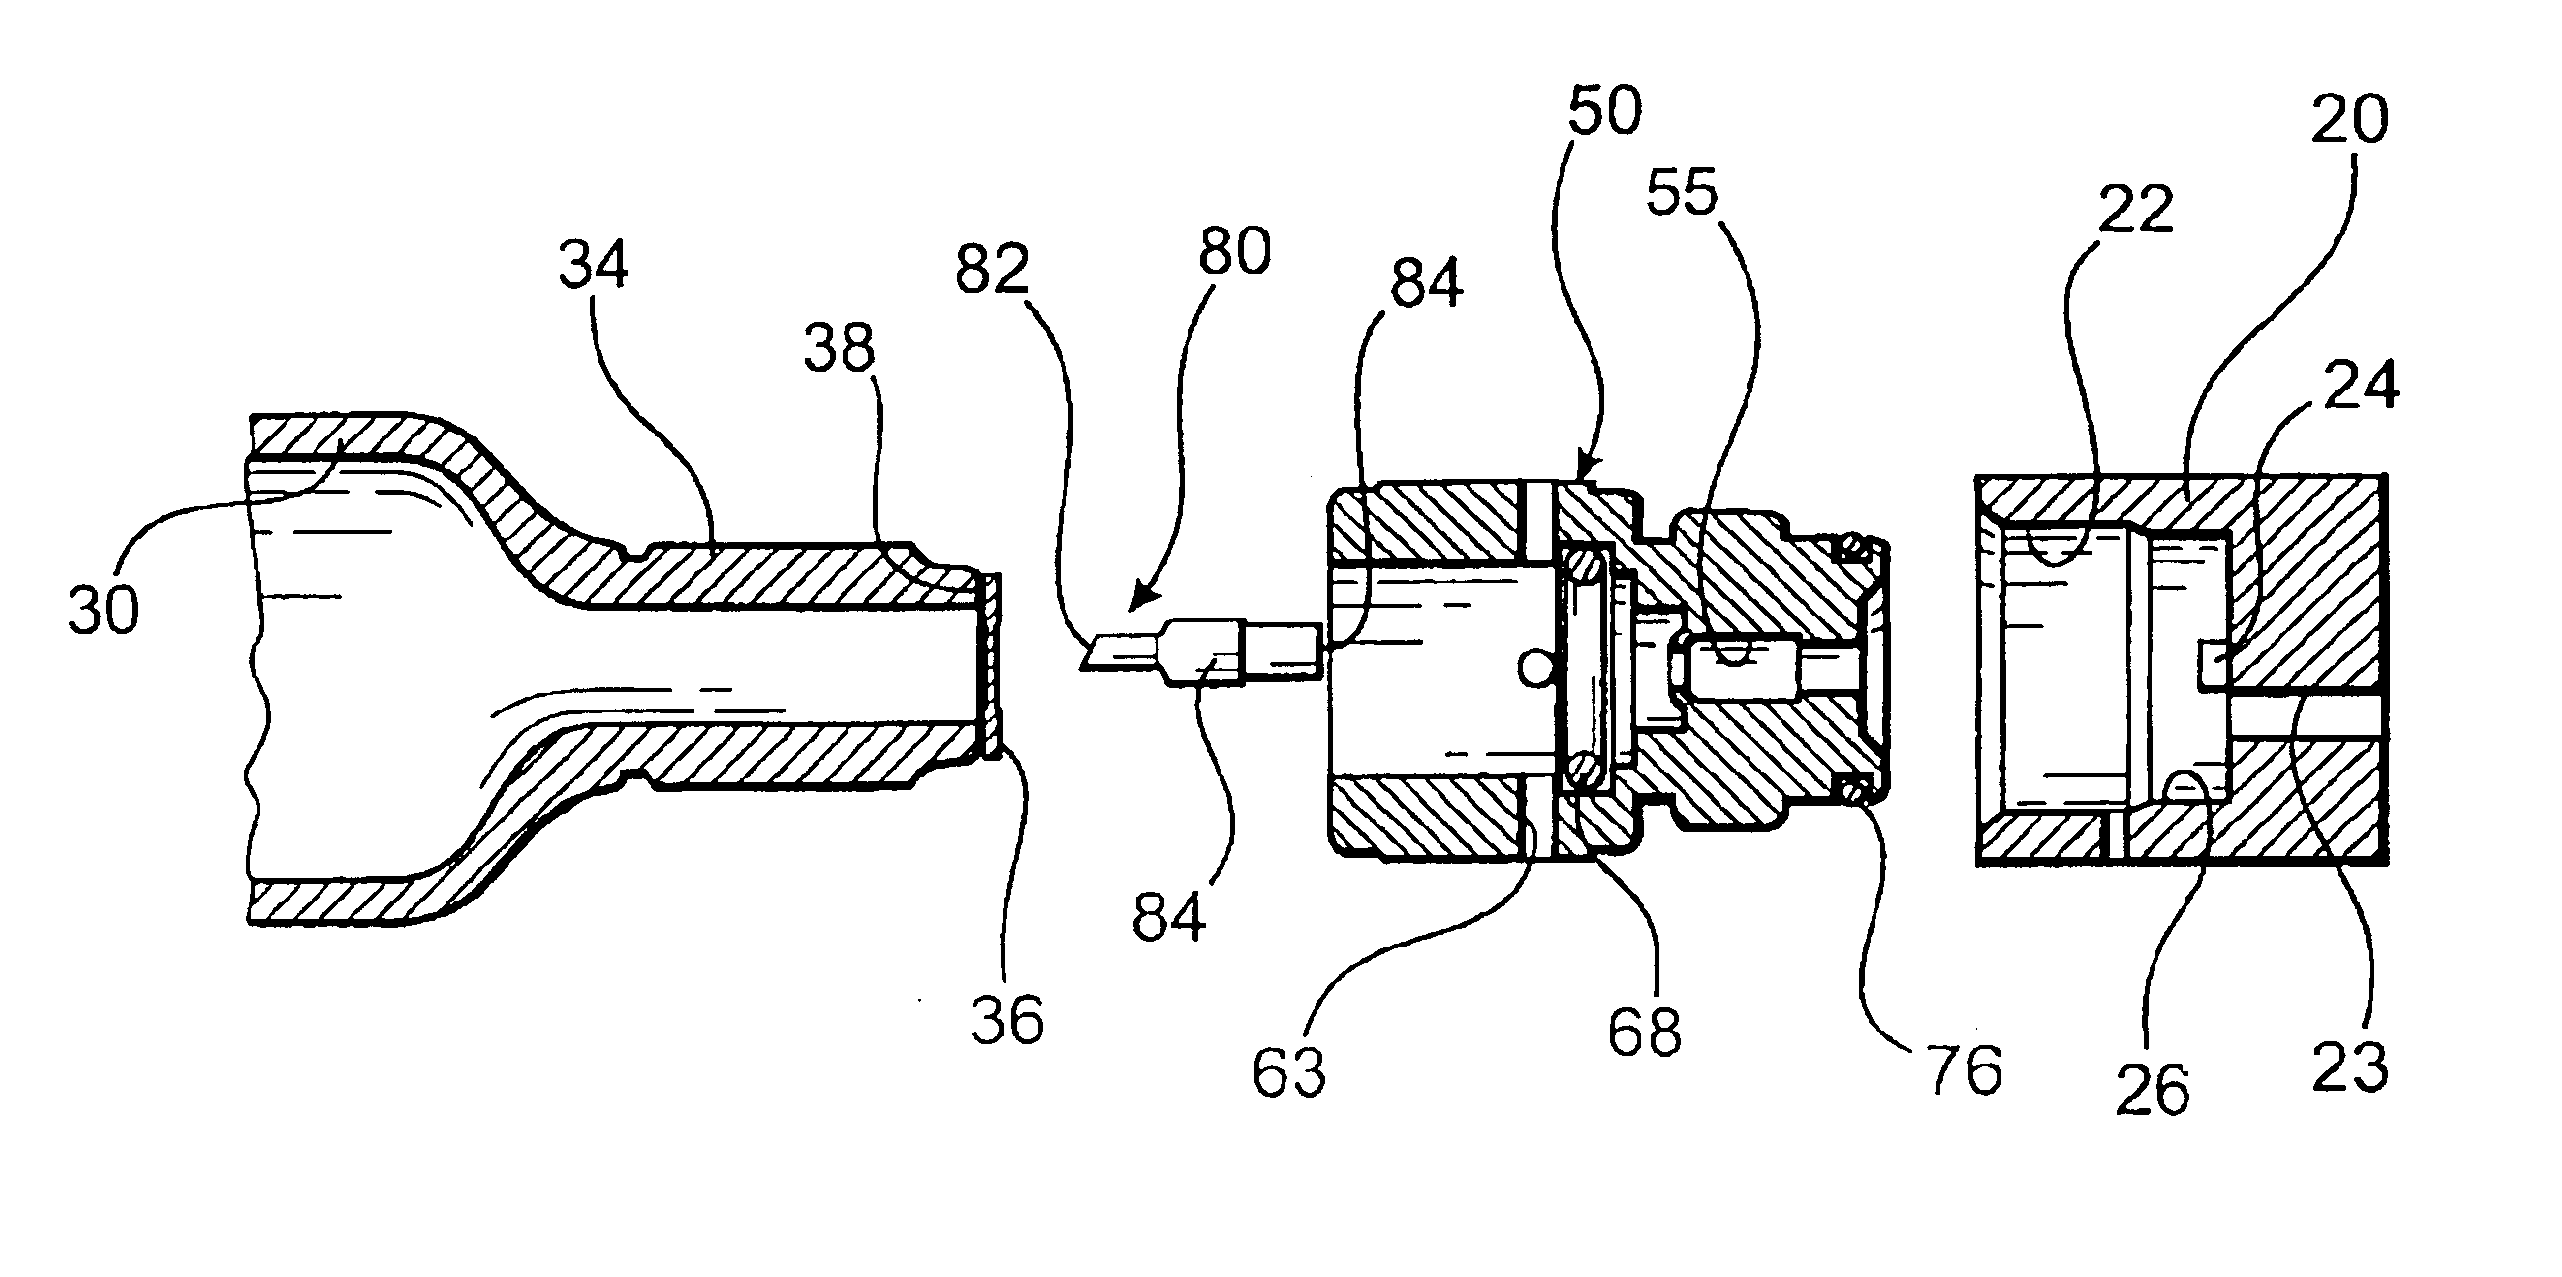 Adapter assembly with floating pin for operably connecting pressurized bottle to a paintball marker